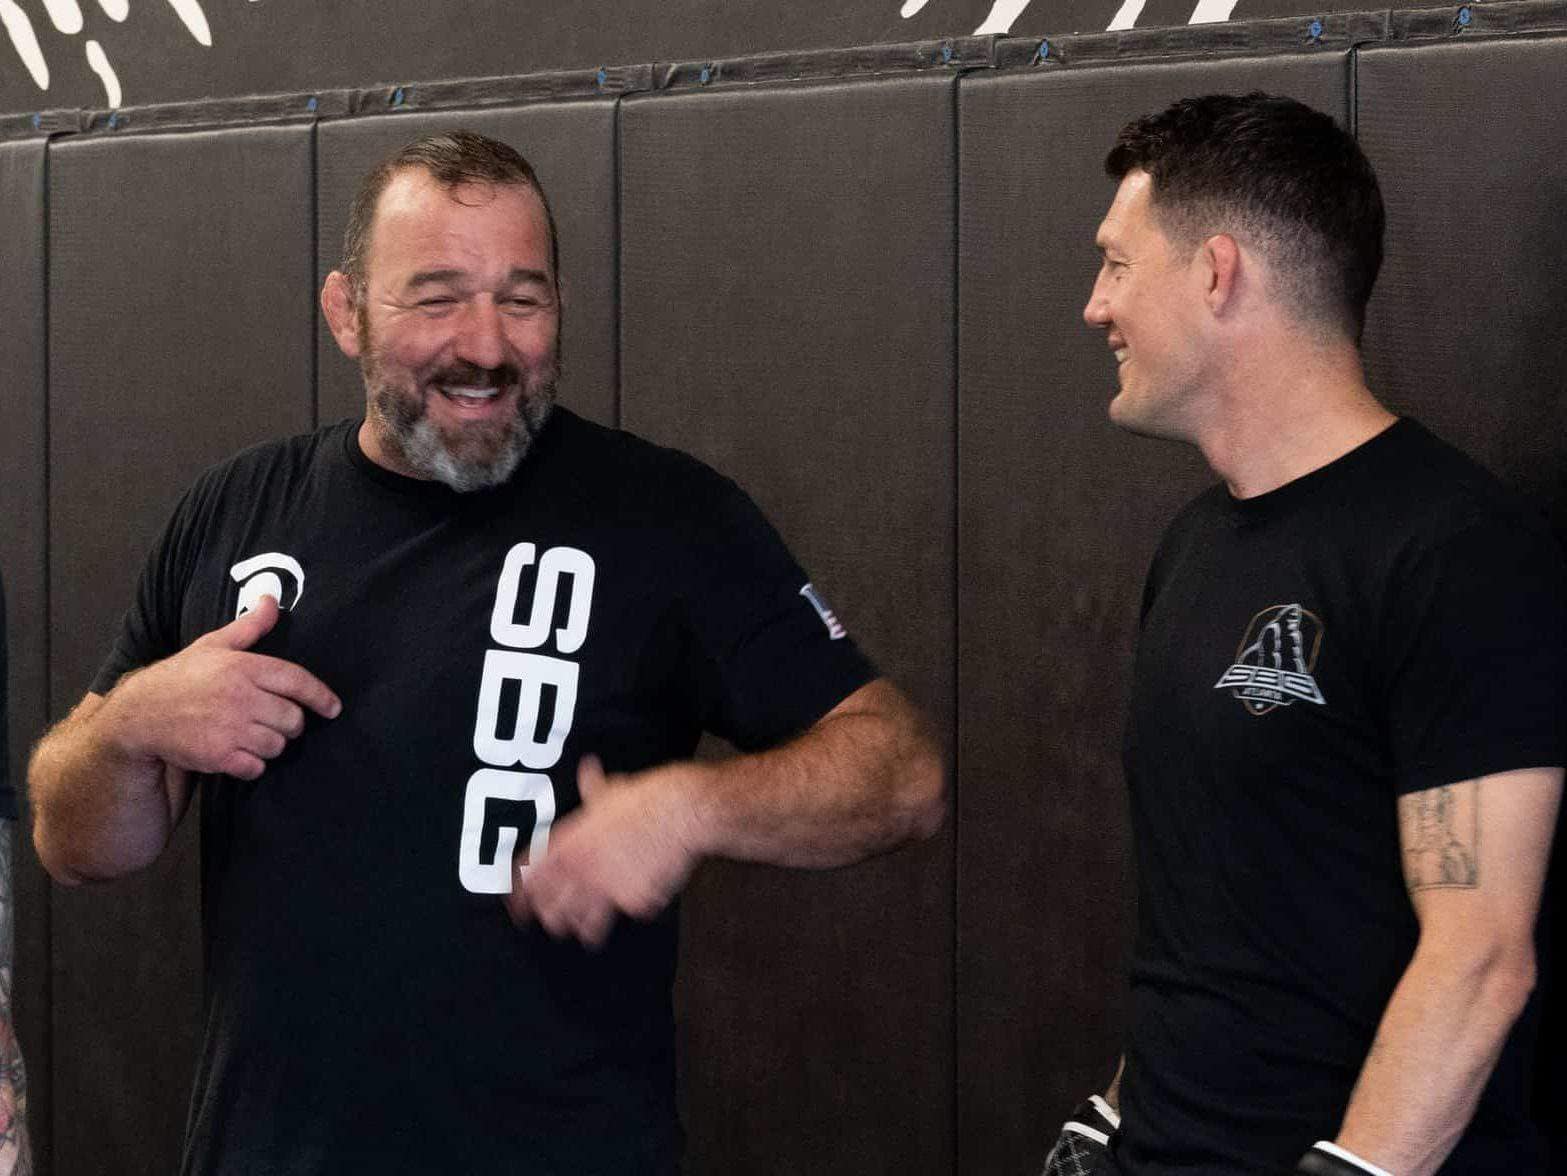 Head Coaches laughing and smiling at SBG